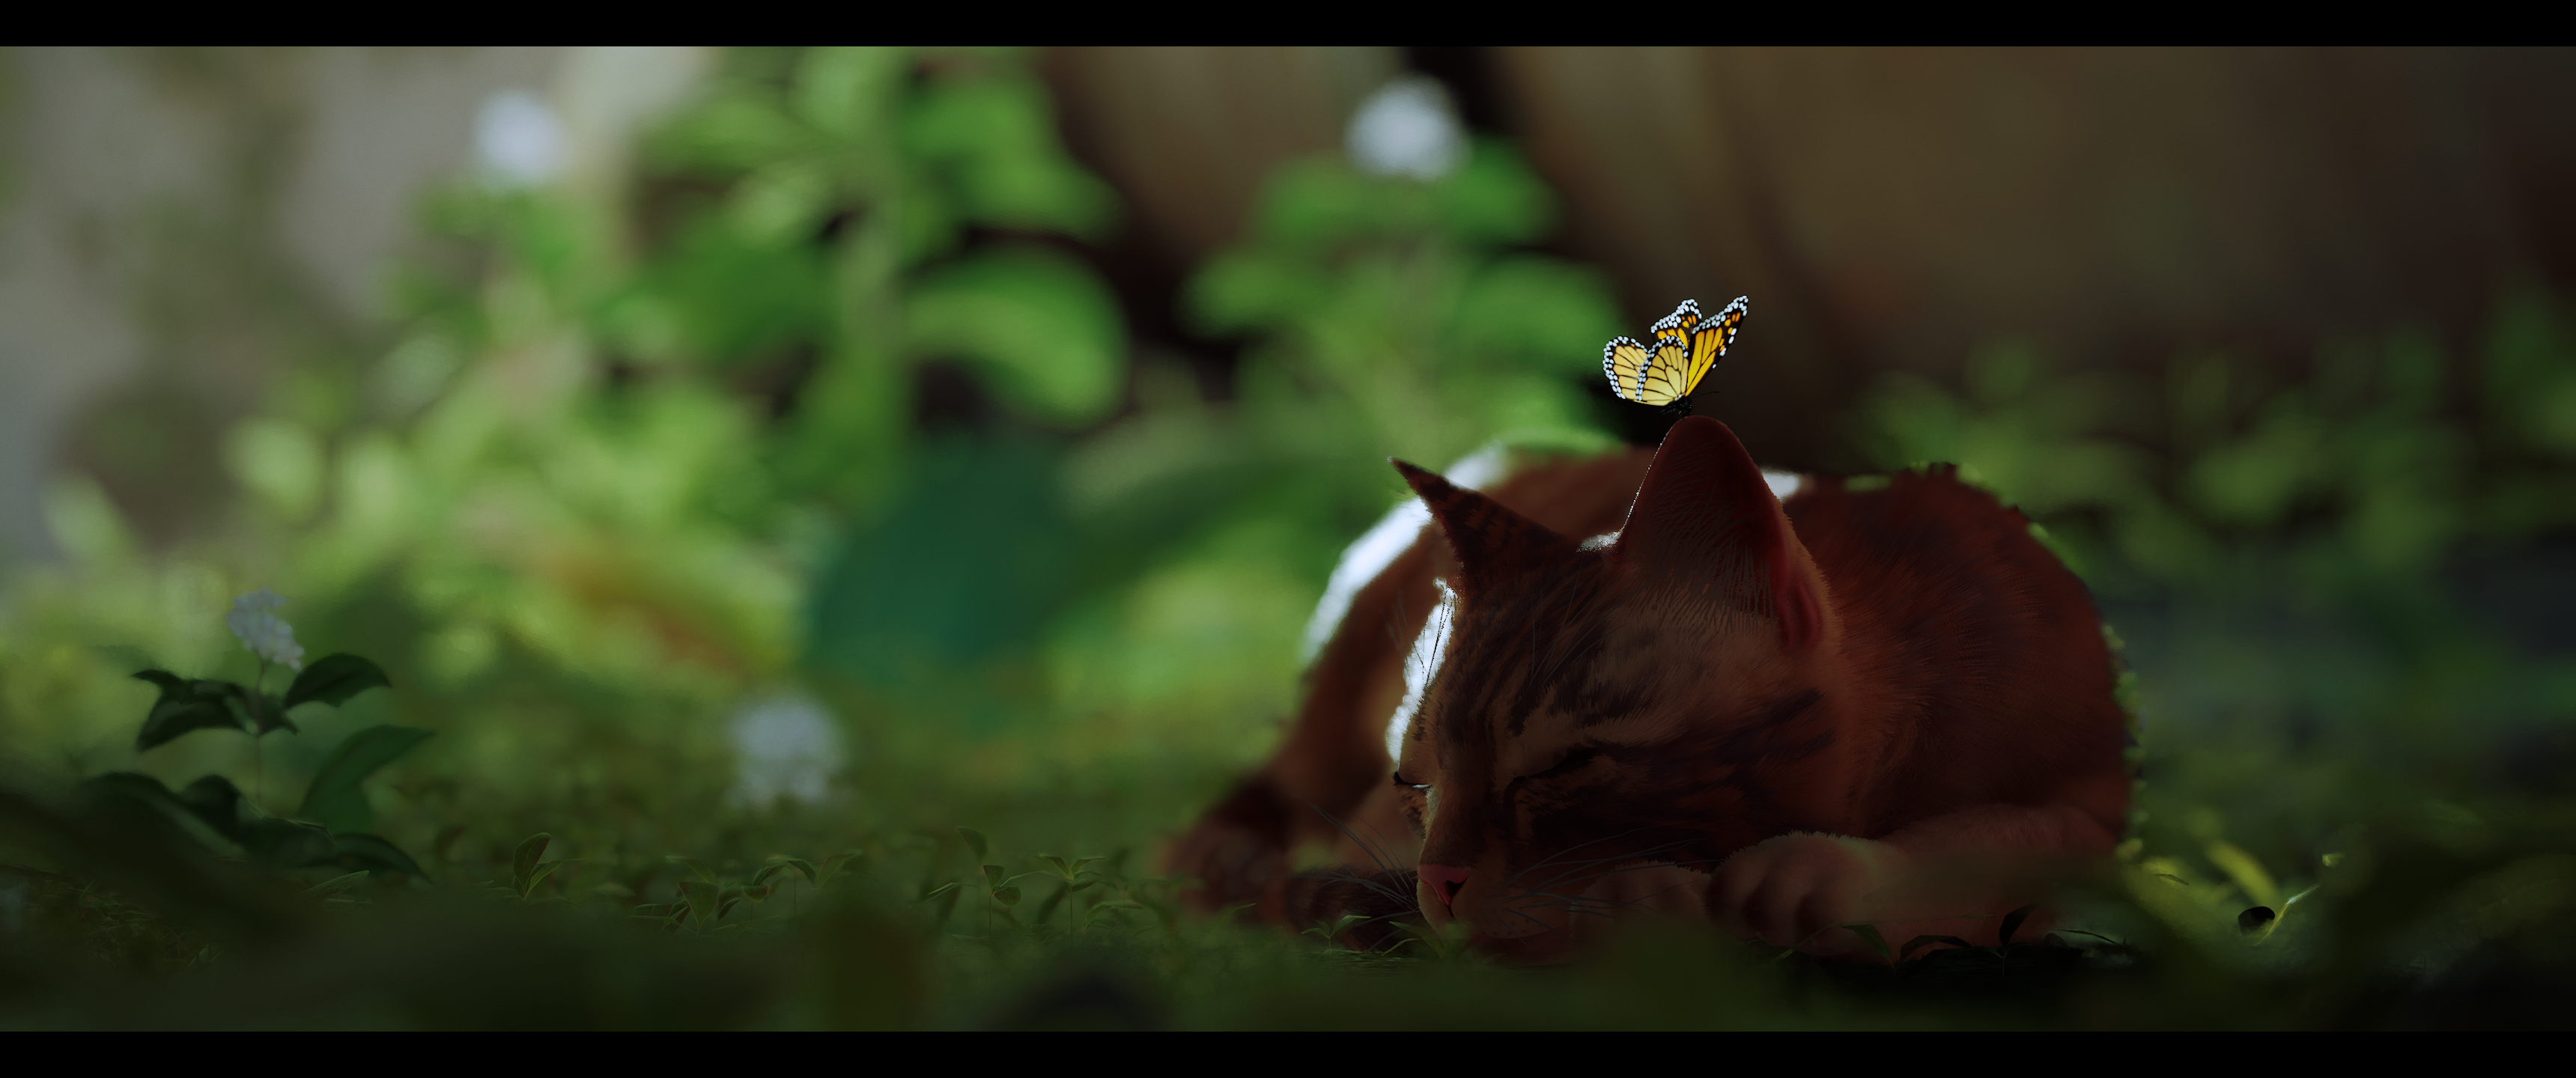 Stray Animals Video Game Animals Screen Shot Cats Butterfly Video Games 3440x1440